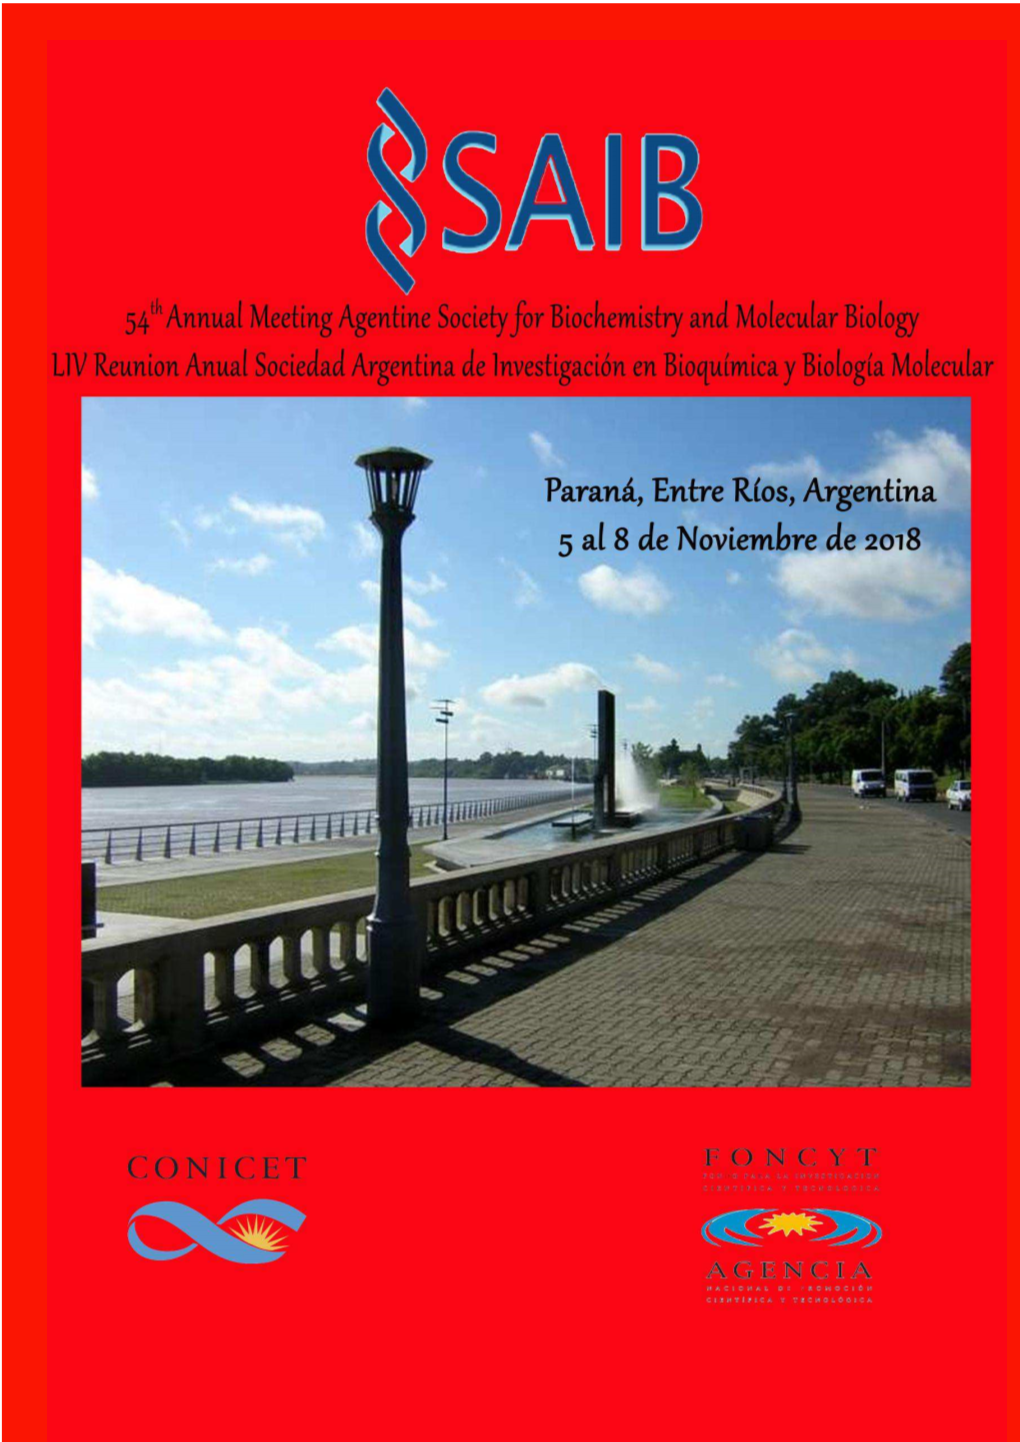 54Th Annual Meeting Argentine Society for Biochemistry and Molecular Biology